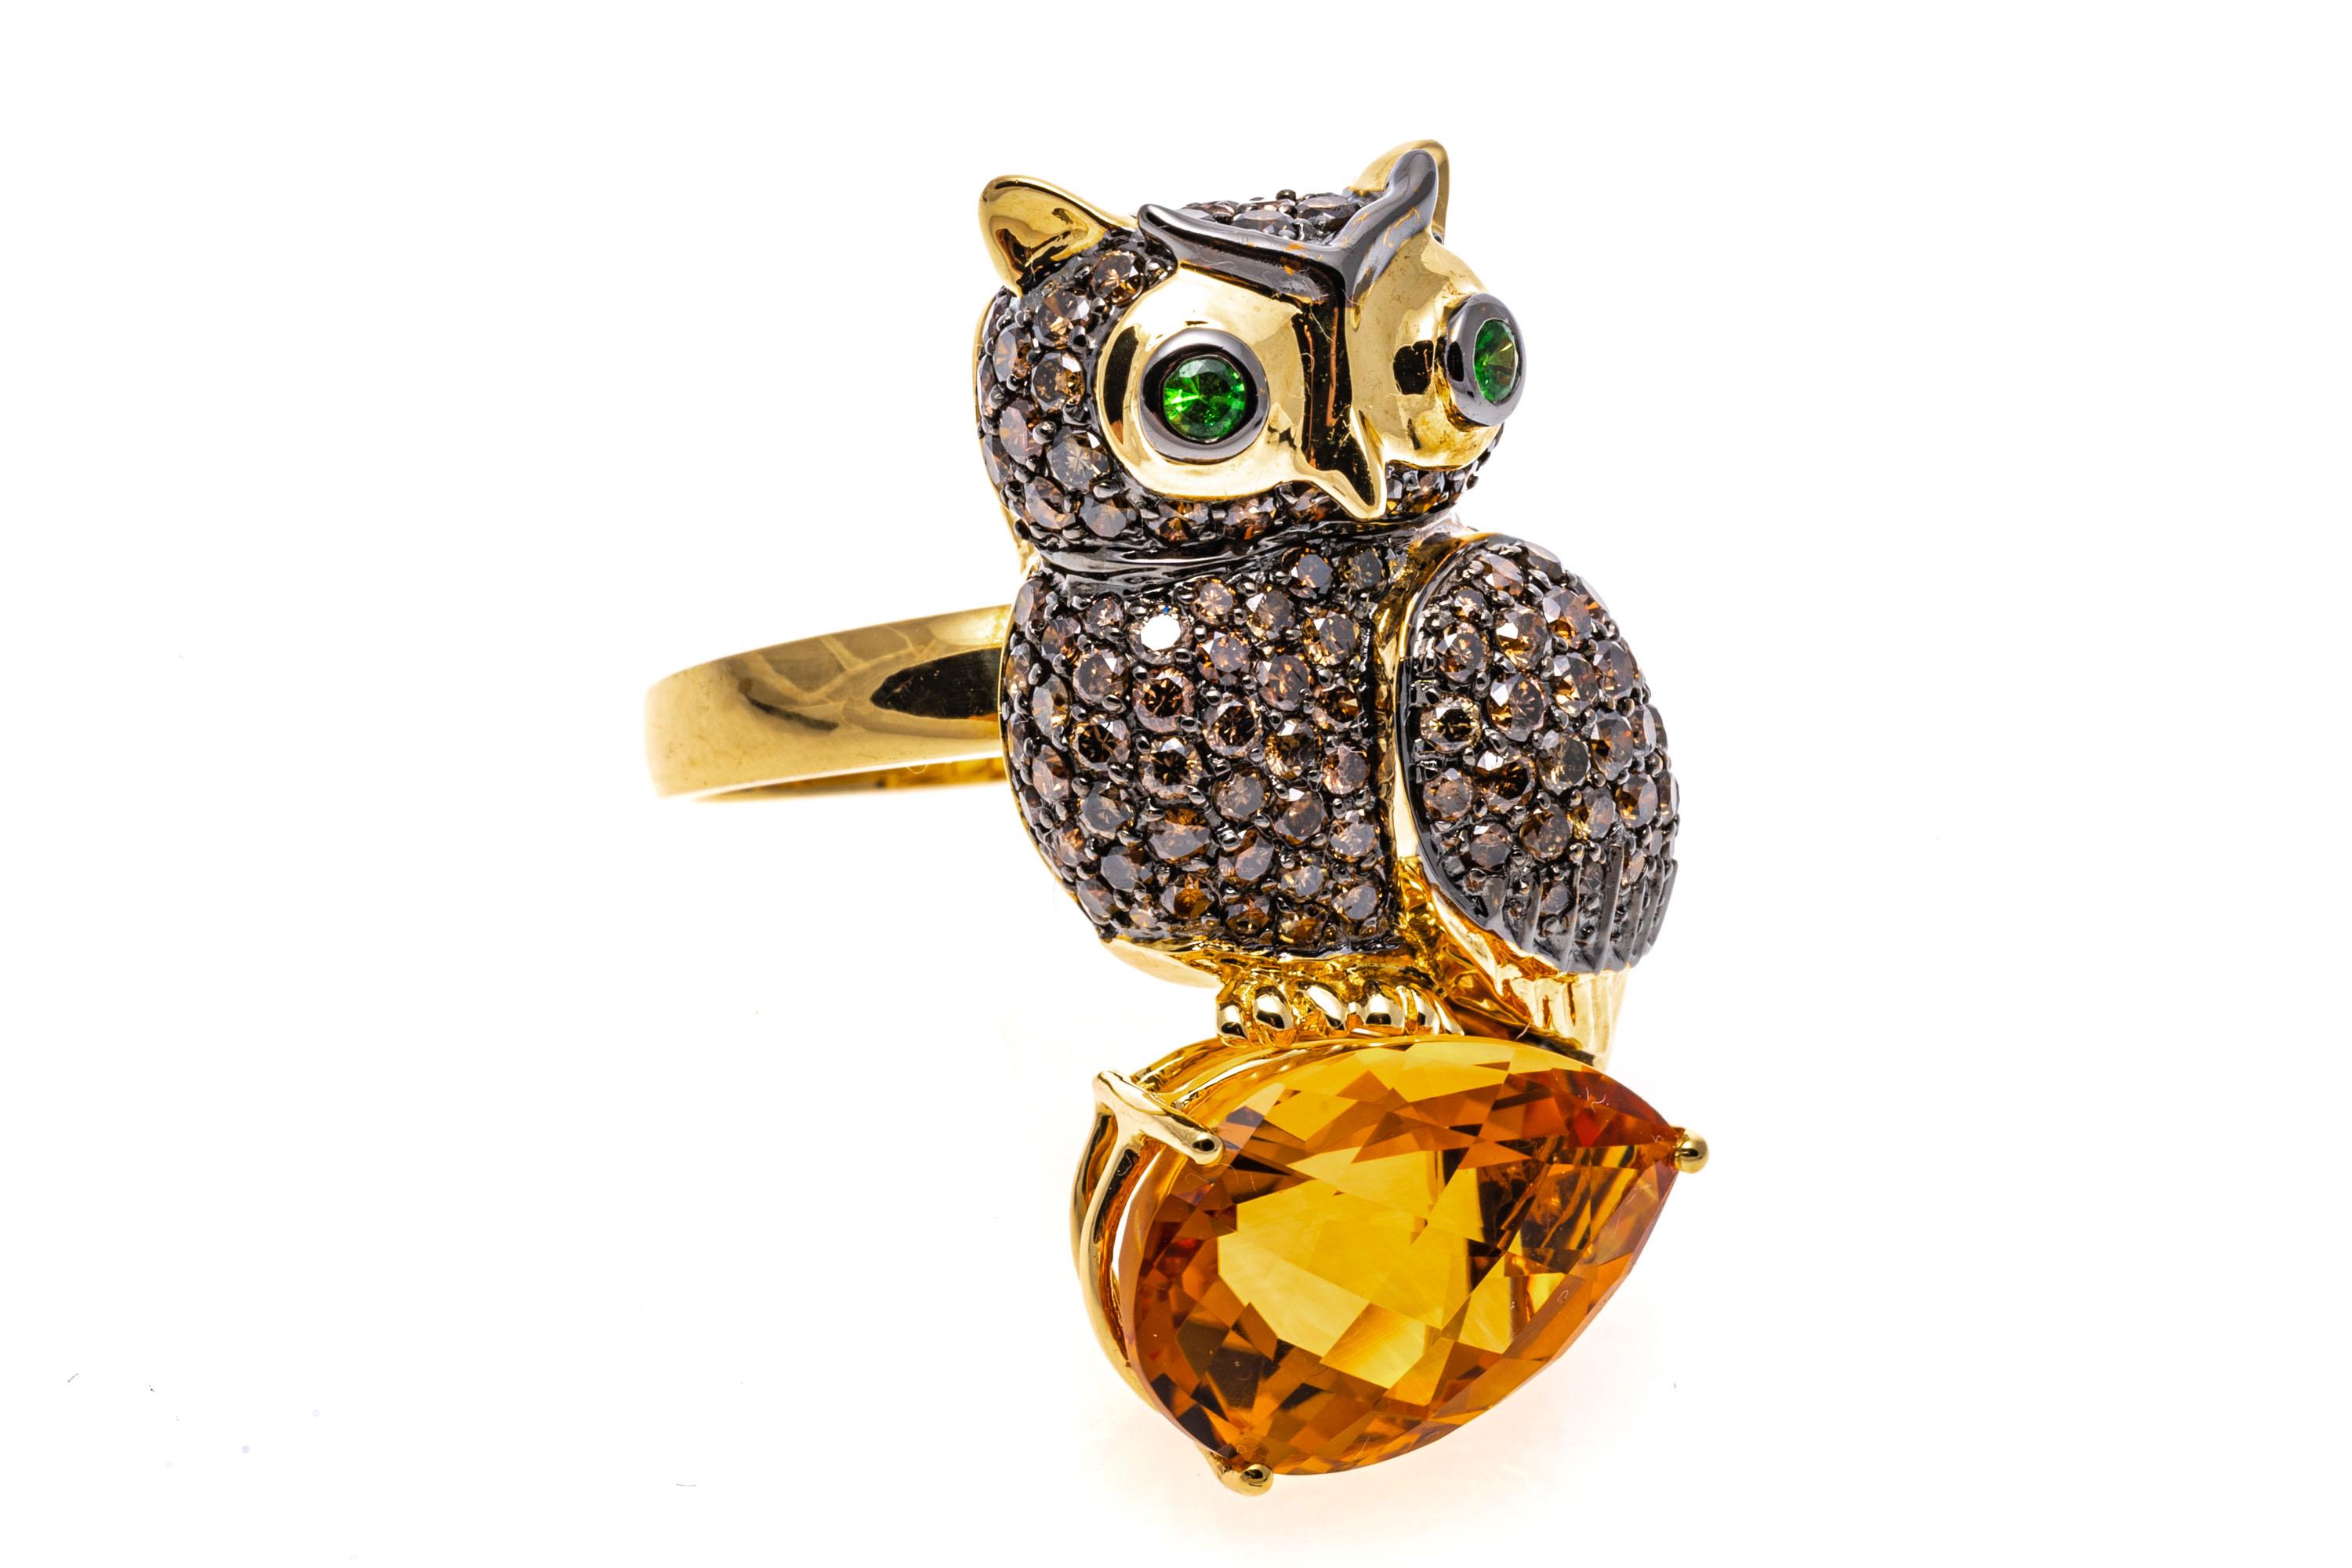 Women's 18k Gold Cognac Diamond Owl Ring/Pendant Set with Tourmaline and Citrine For Sale